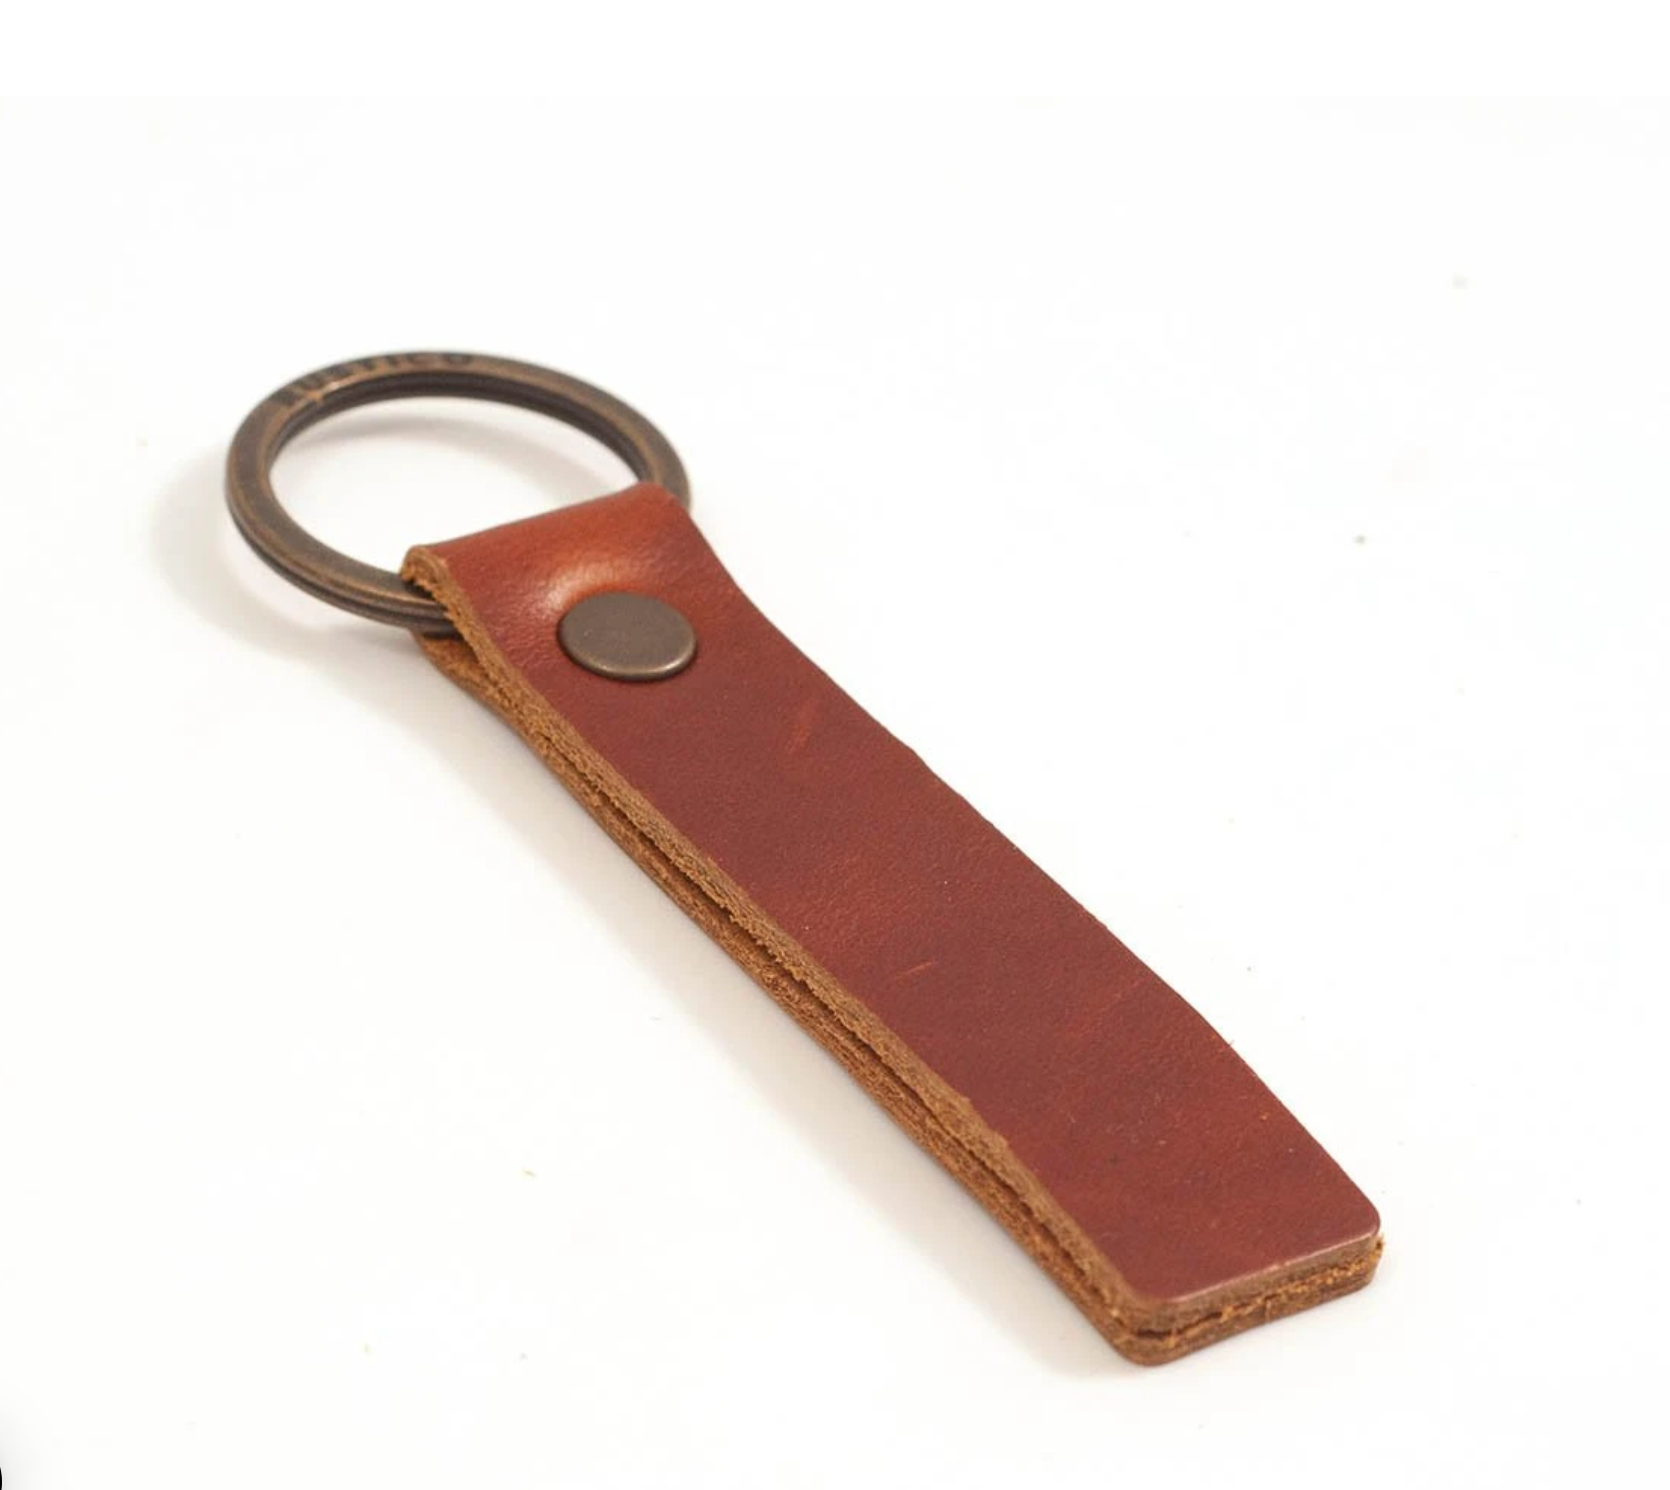 BigPong Keychain Leather Key Holder for Home and Car Keys - Anti-lost, Waterproof, and Durable,Key Chains for Men and Women